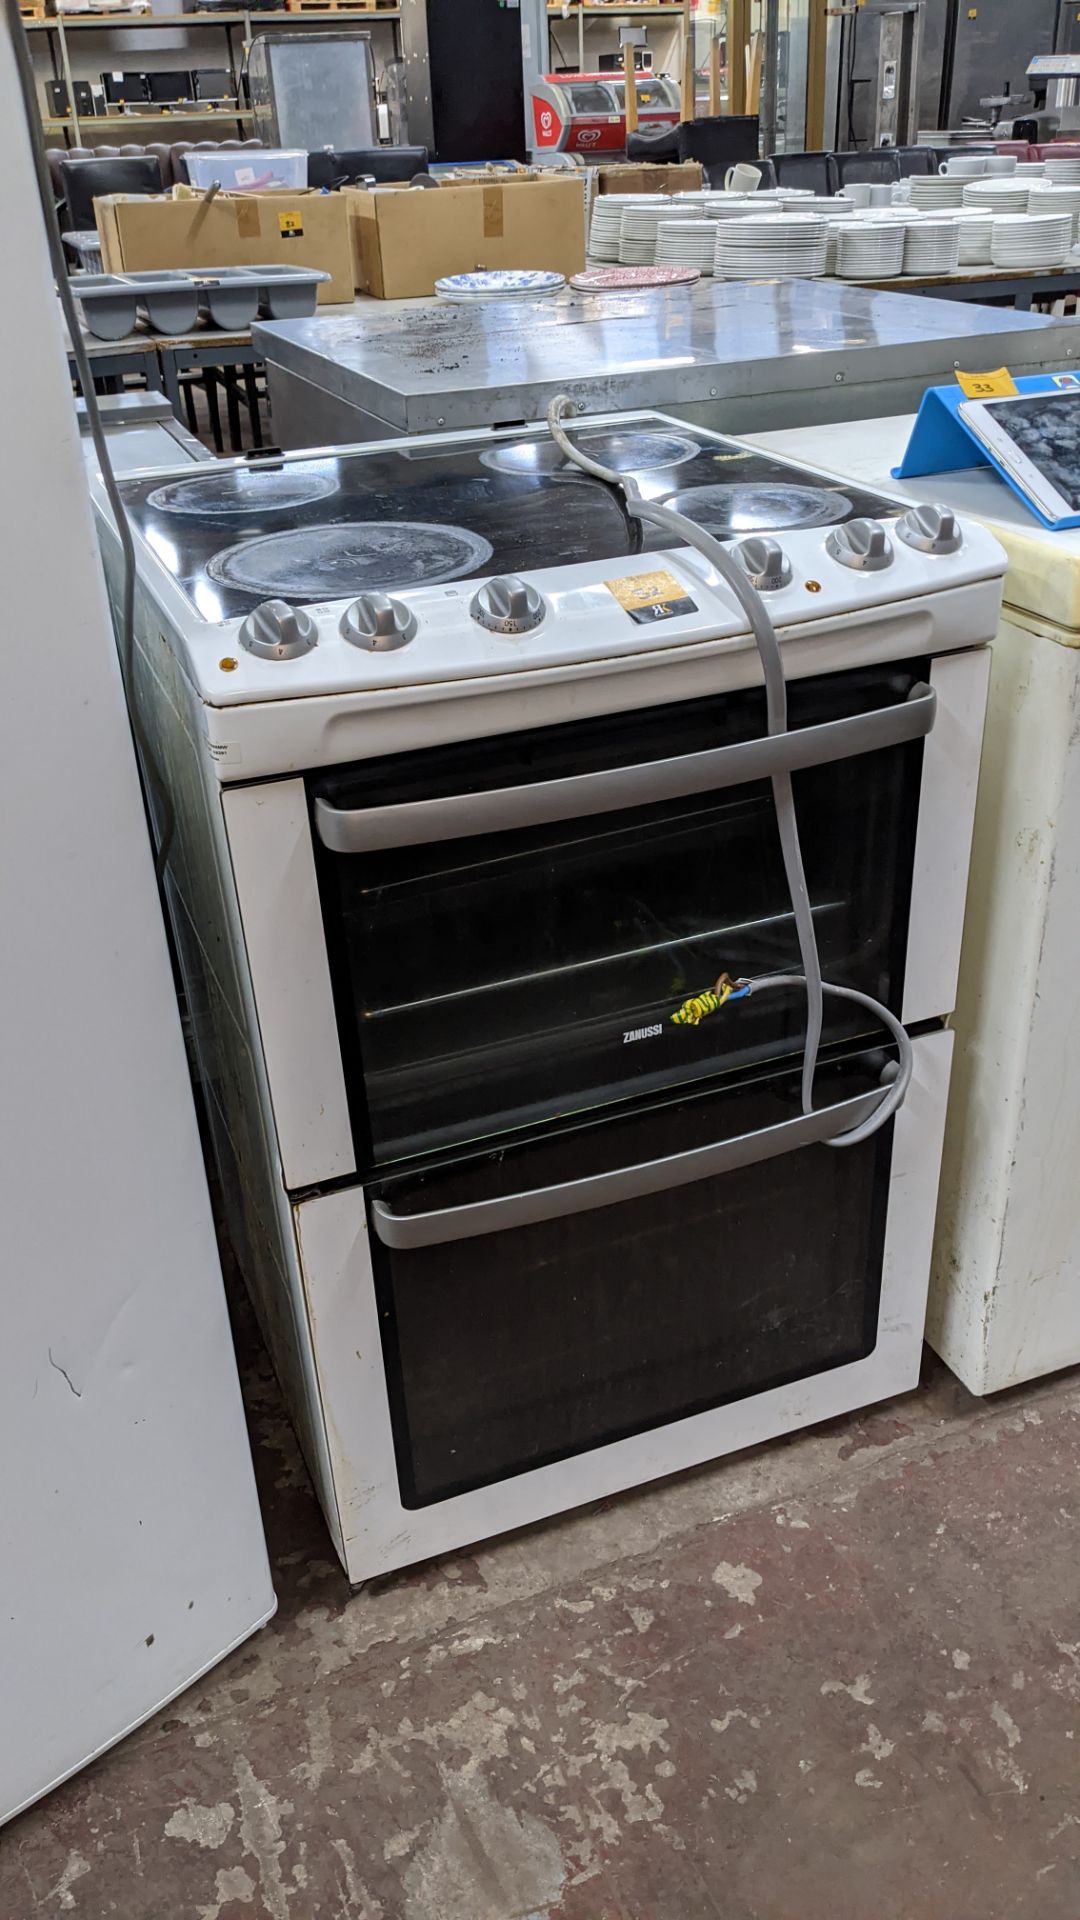 Zanussi electric 4 ring oven - Image 2 of 4